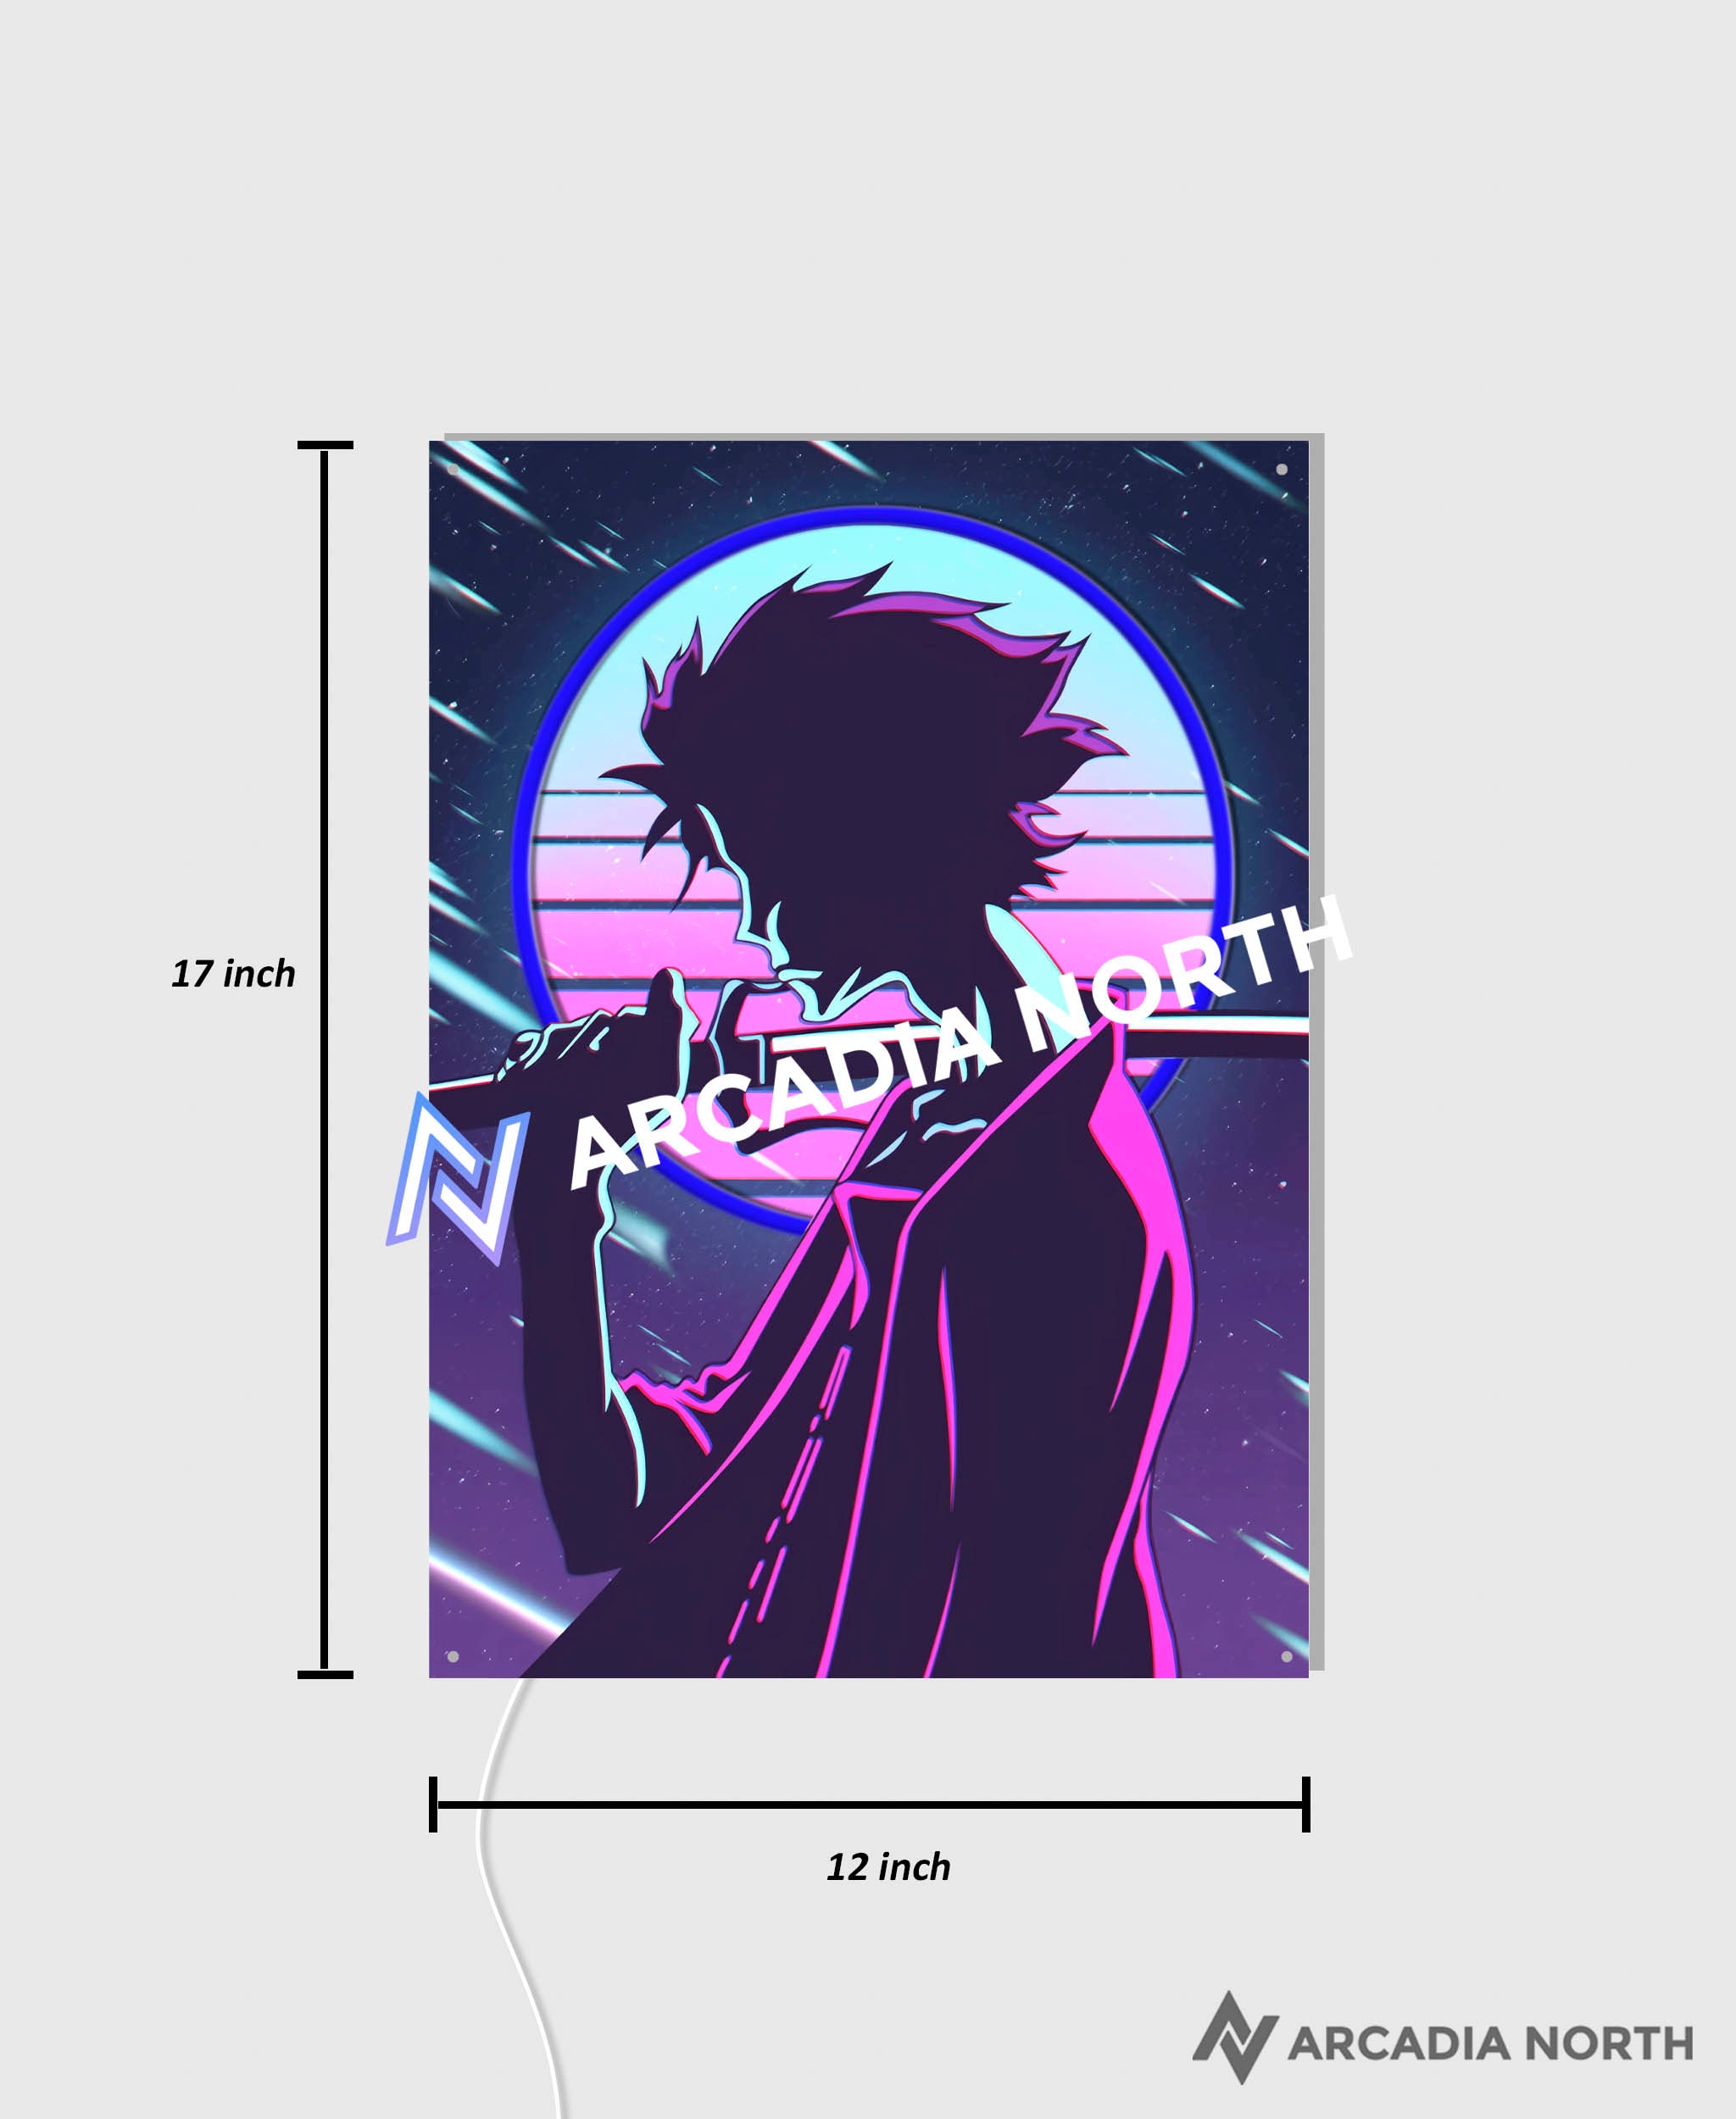 Arcadia North AURALIGHT Original LED Poster featuring the anime Samurai Champloo with Mugen in synthwave style. Illuminated by glowing neon LED lights. UV-printed on acrylic.